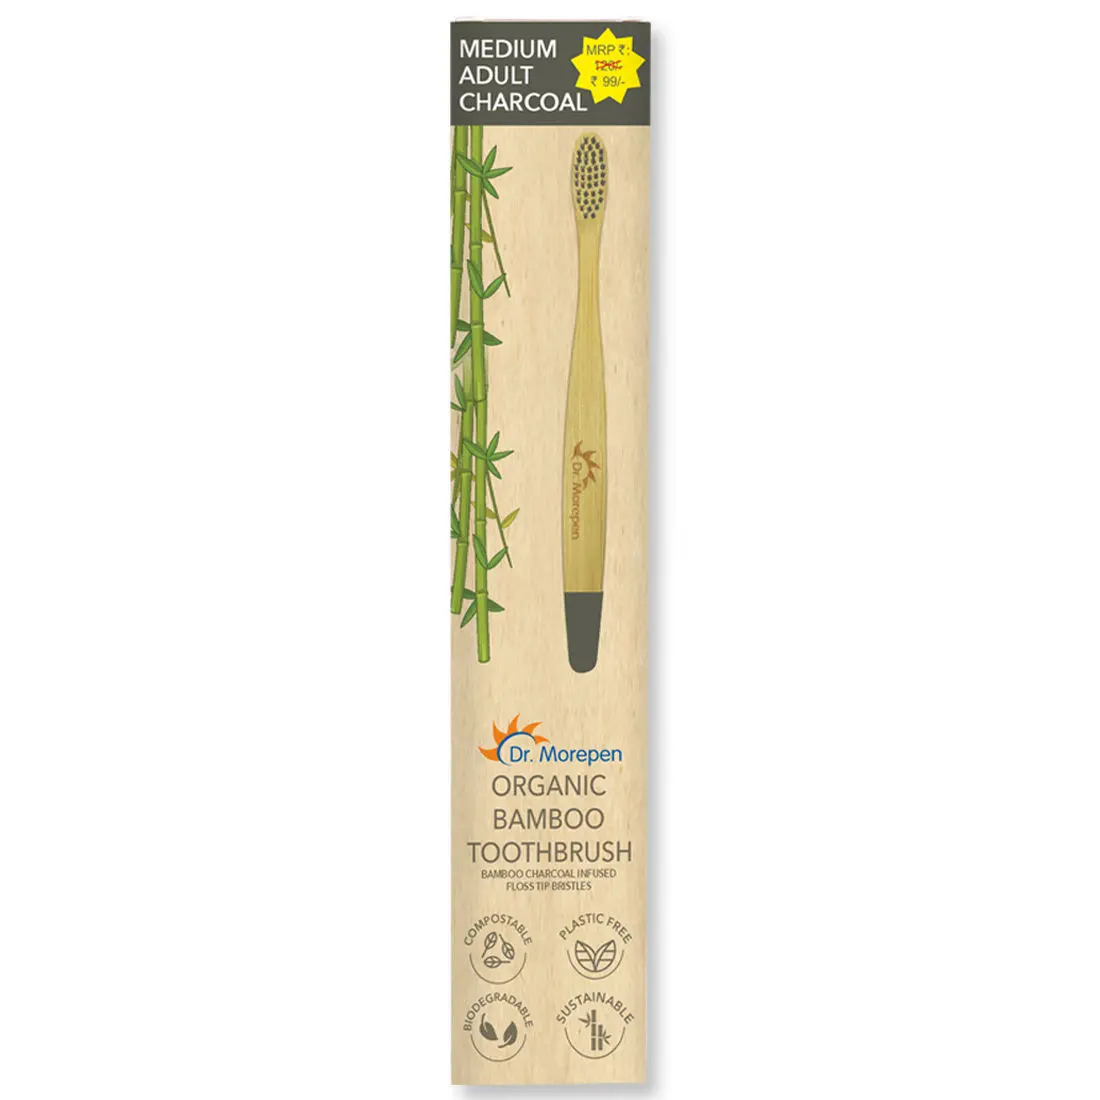 DR. MOREPEN Organic Bamboo Toothbrush For Adults - Charcoal